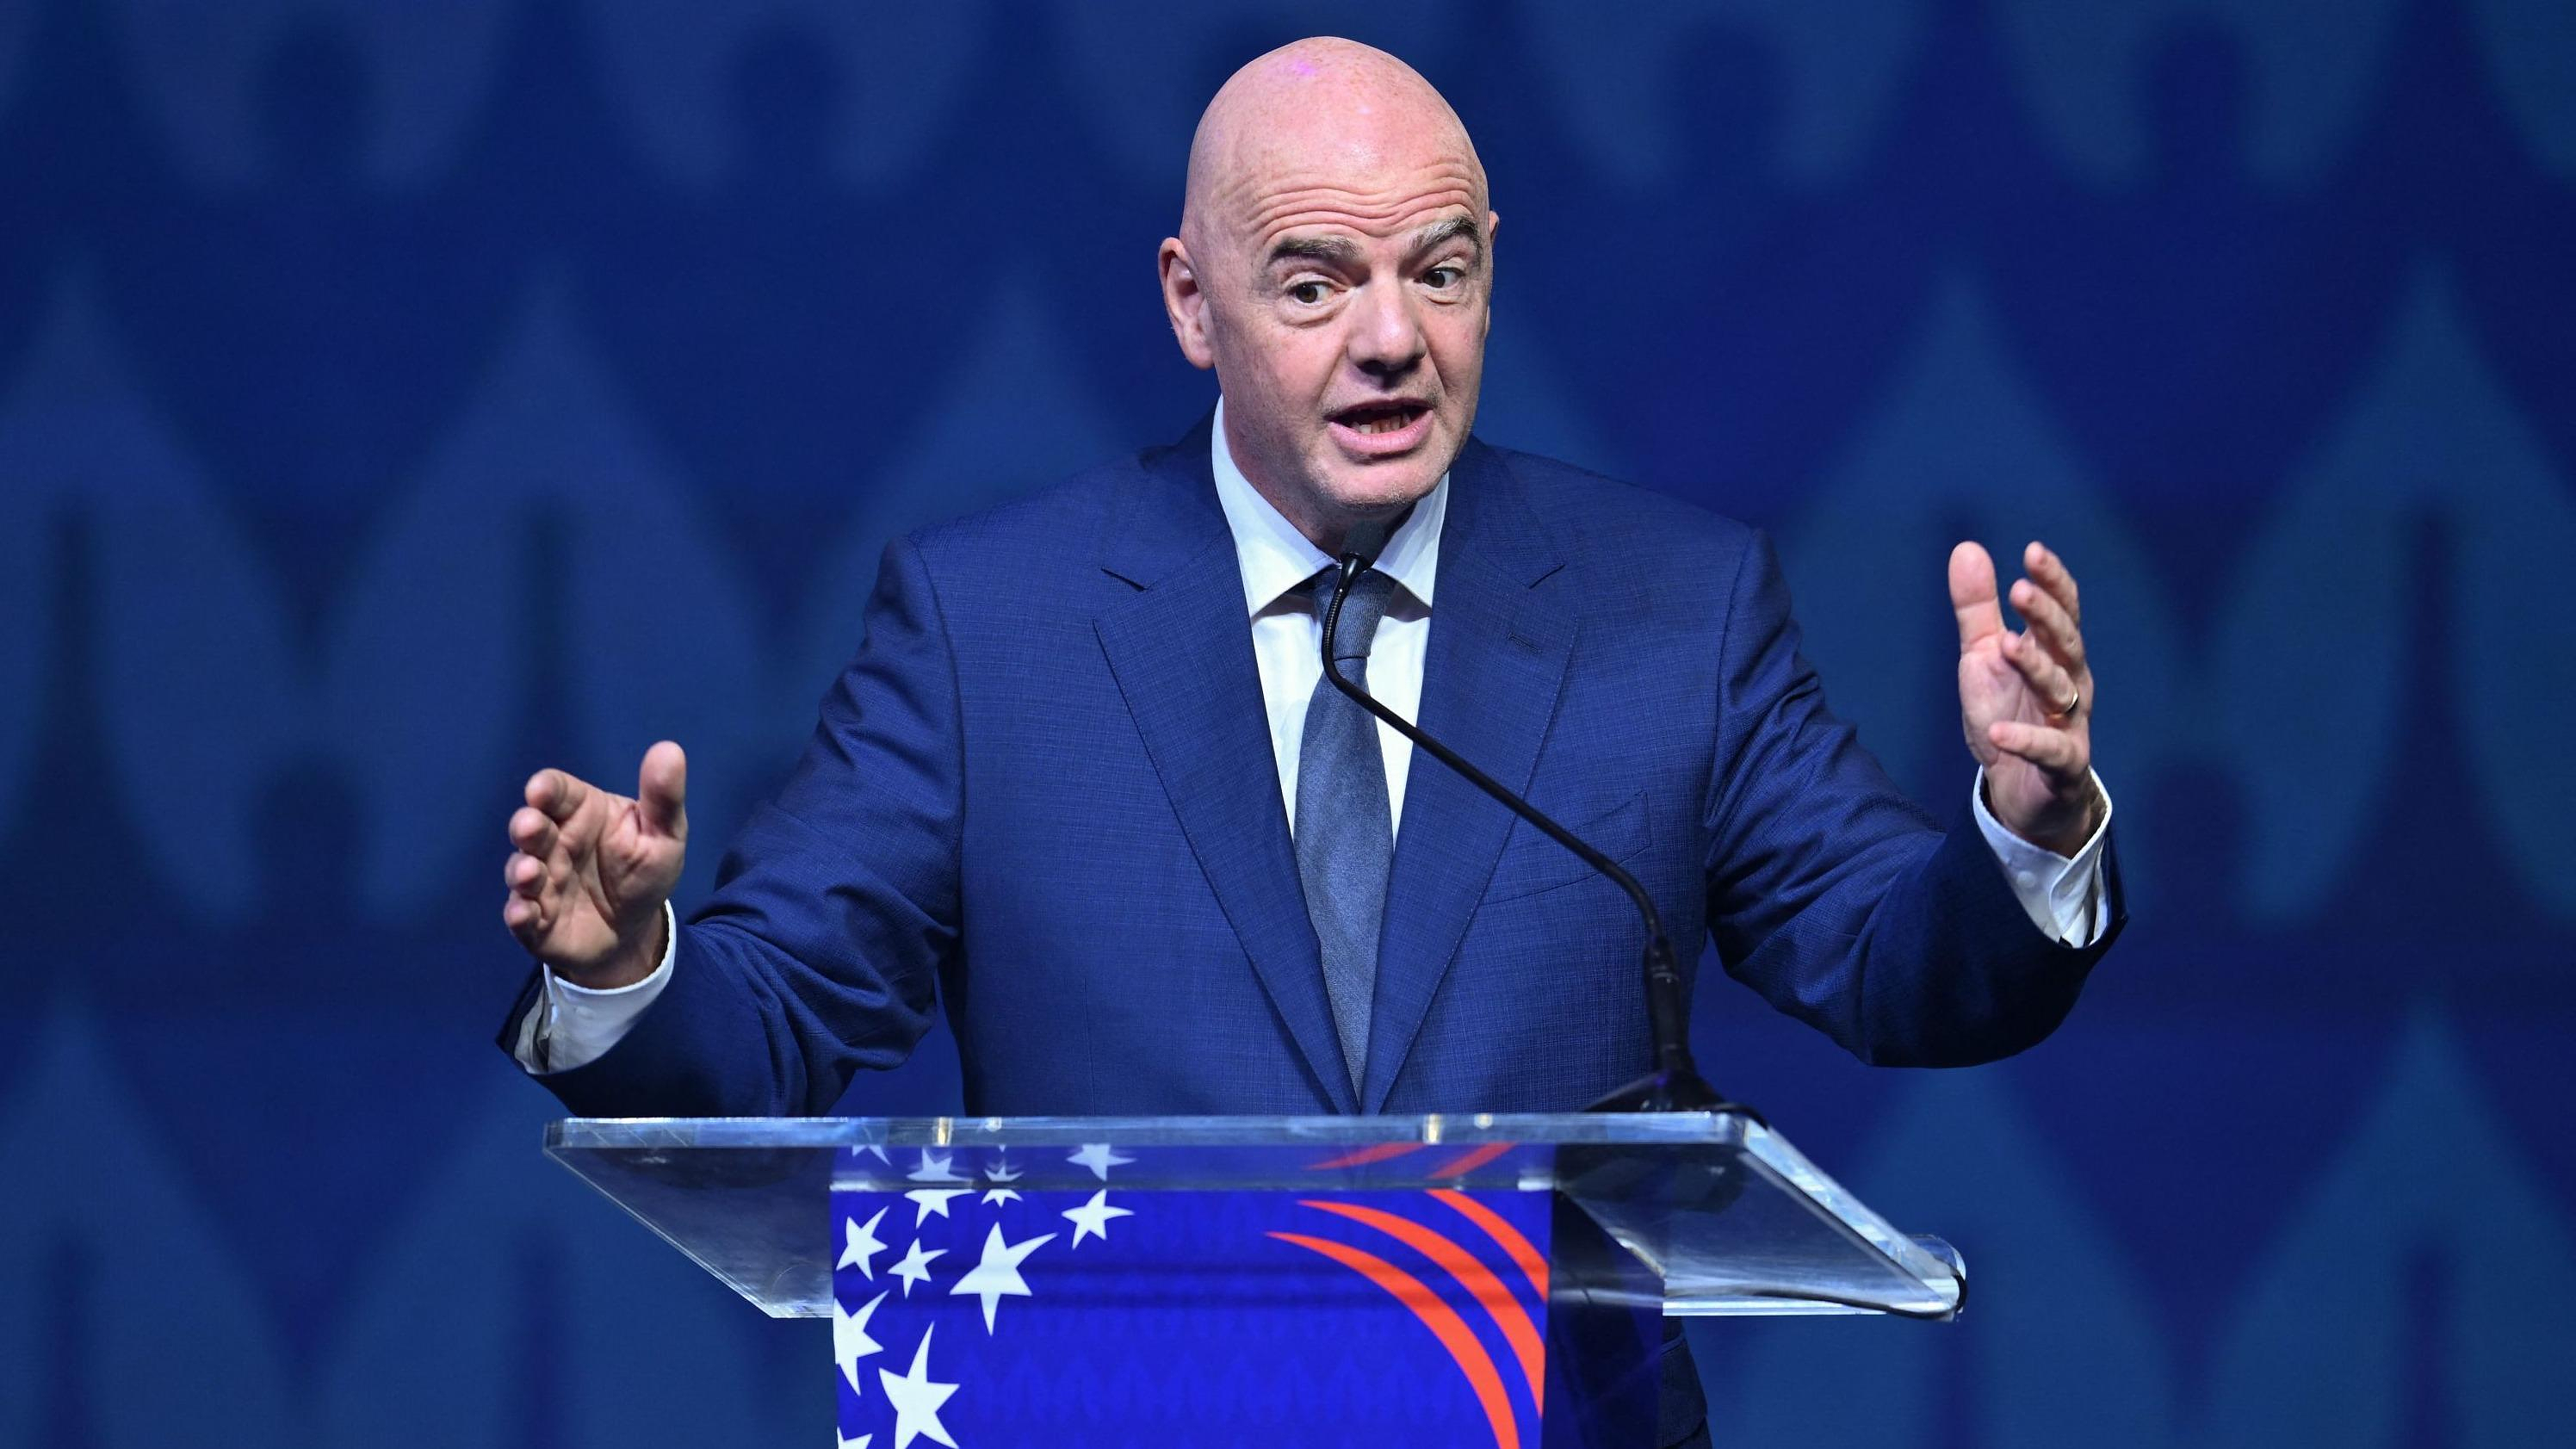 Football: Gianni Infantino welcomes the presence of 3,000 women in the stands of an Iranian championship match